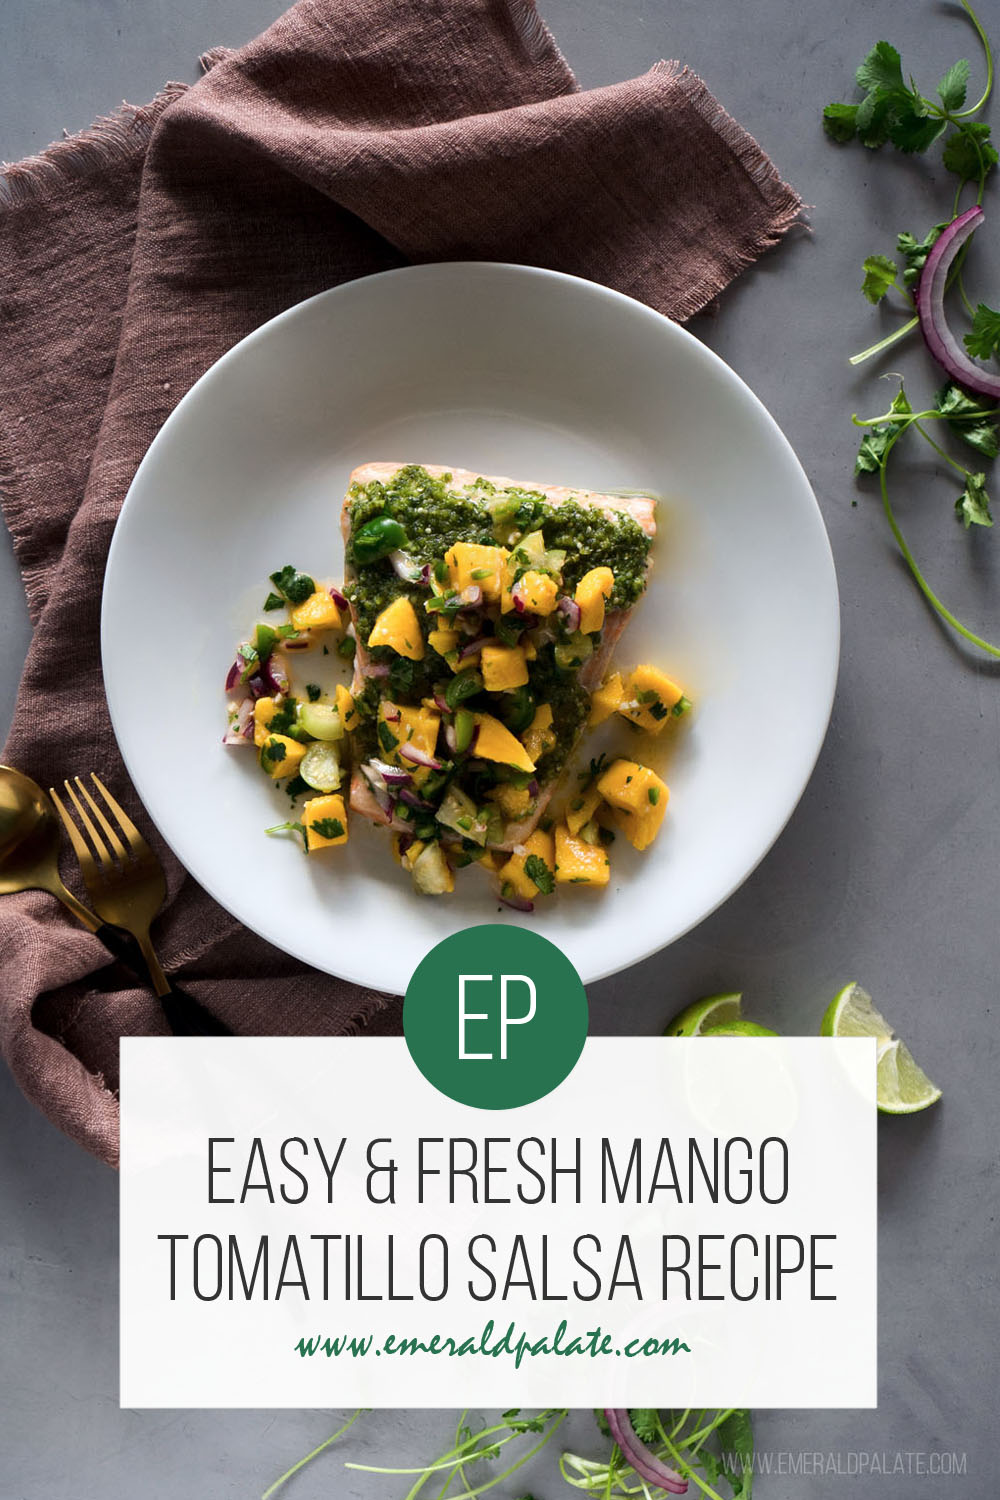 This mango tomatillo salsa recipe is fresh, healthy, and summery no matter the time of year. Tomatillo and mango salsa goes perfectly over fatty fish like Arctic char, salmon, or steelhead because the high acid cuts the fat and makes it feel light. If you're looking for a fish with salsa recipe, make it this! It's a fun spin on tomatillo salsa you likely haven't seen before.